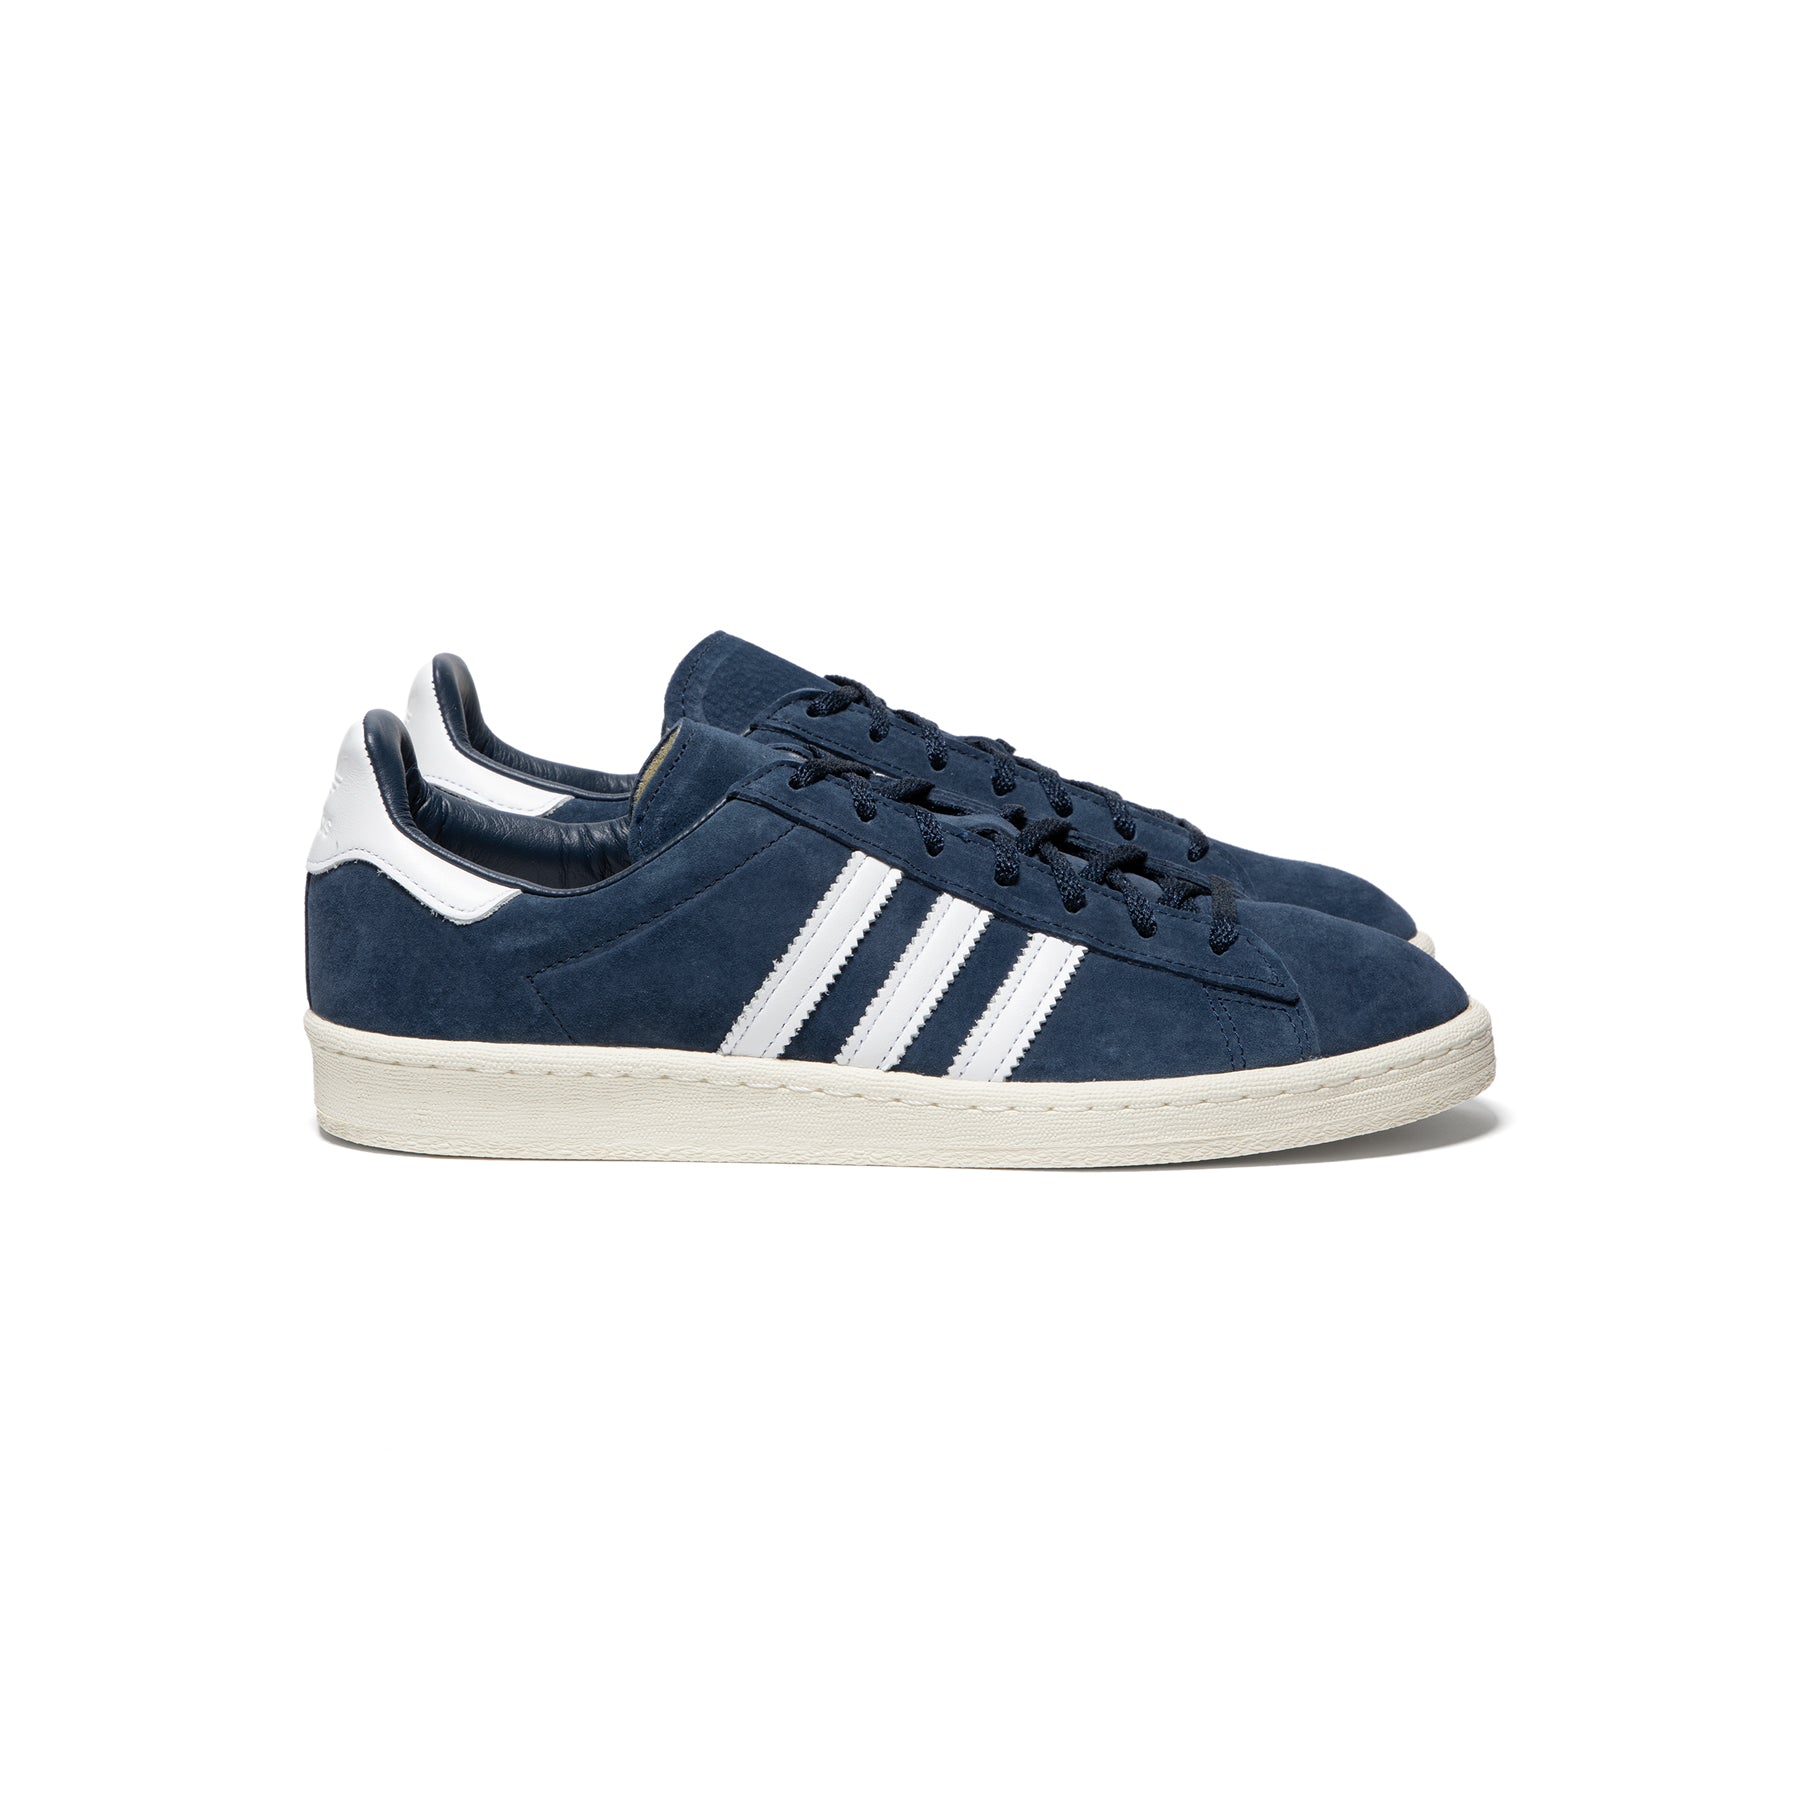 Adidas Campus 80s (Navy/Feather White) – Concepts